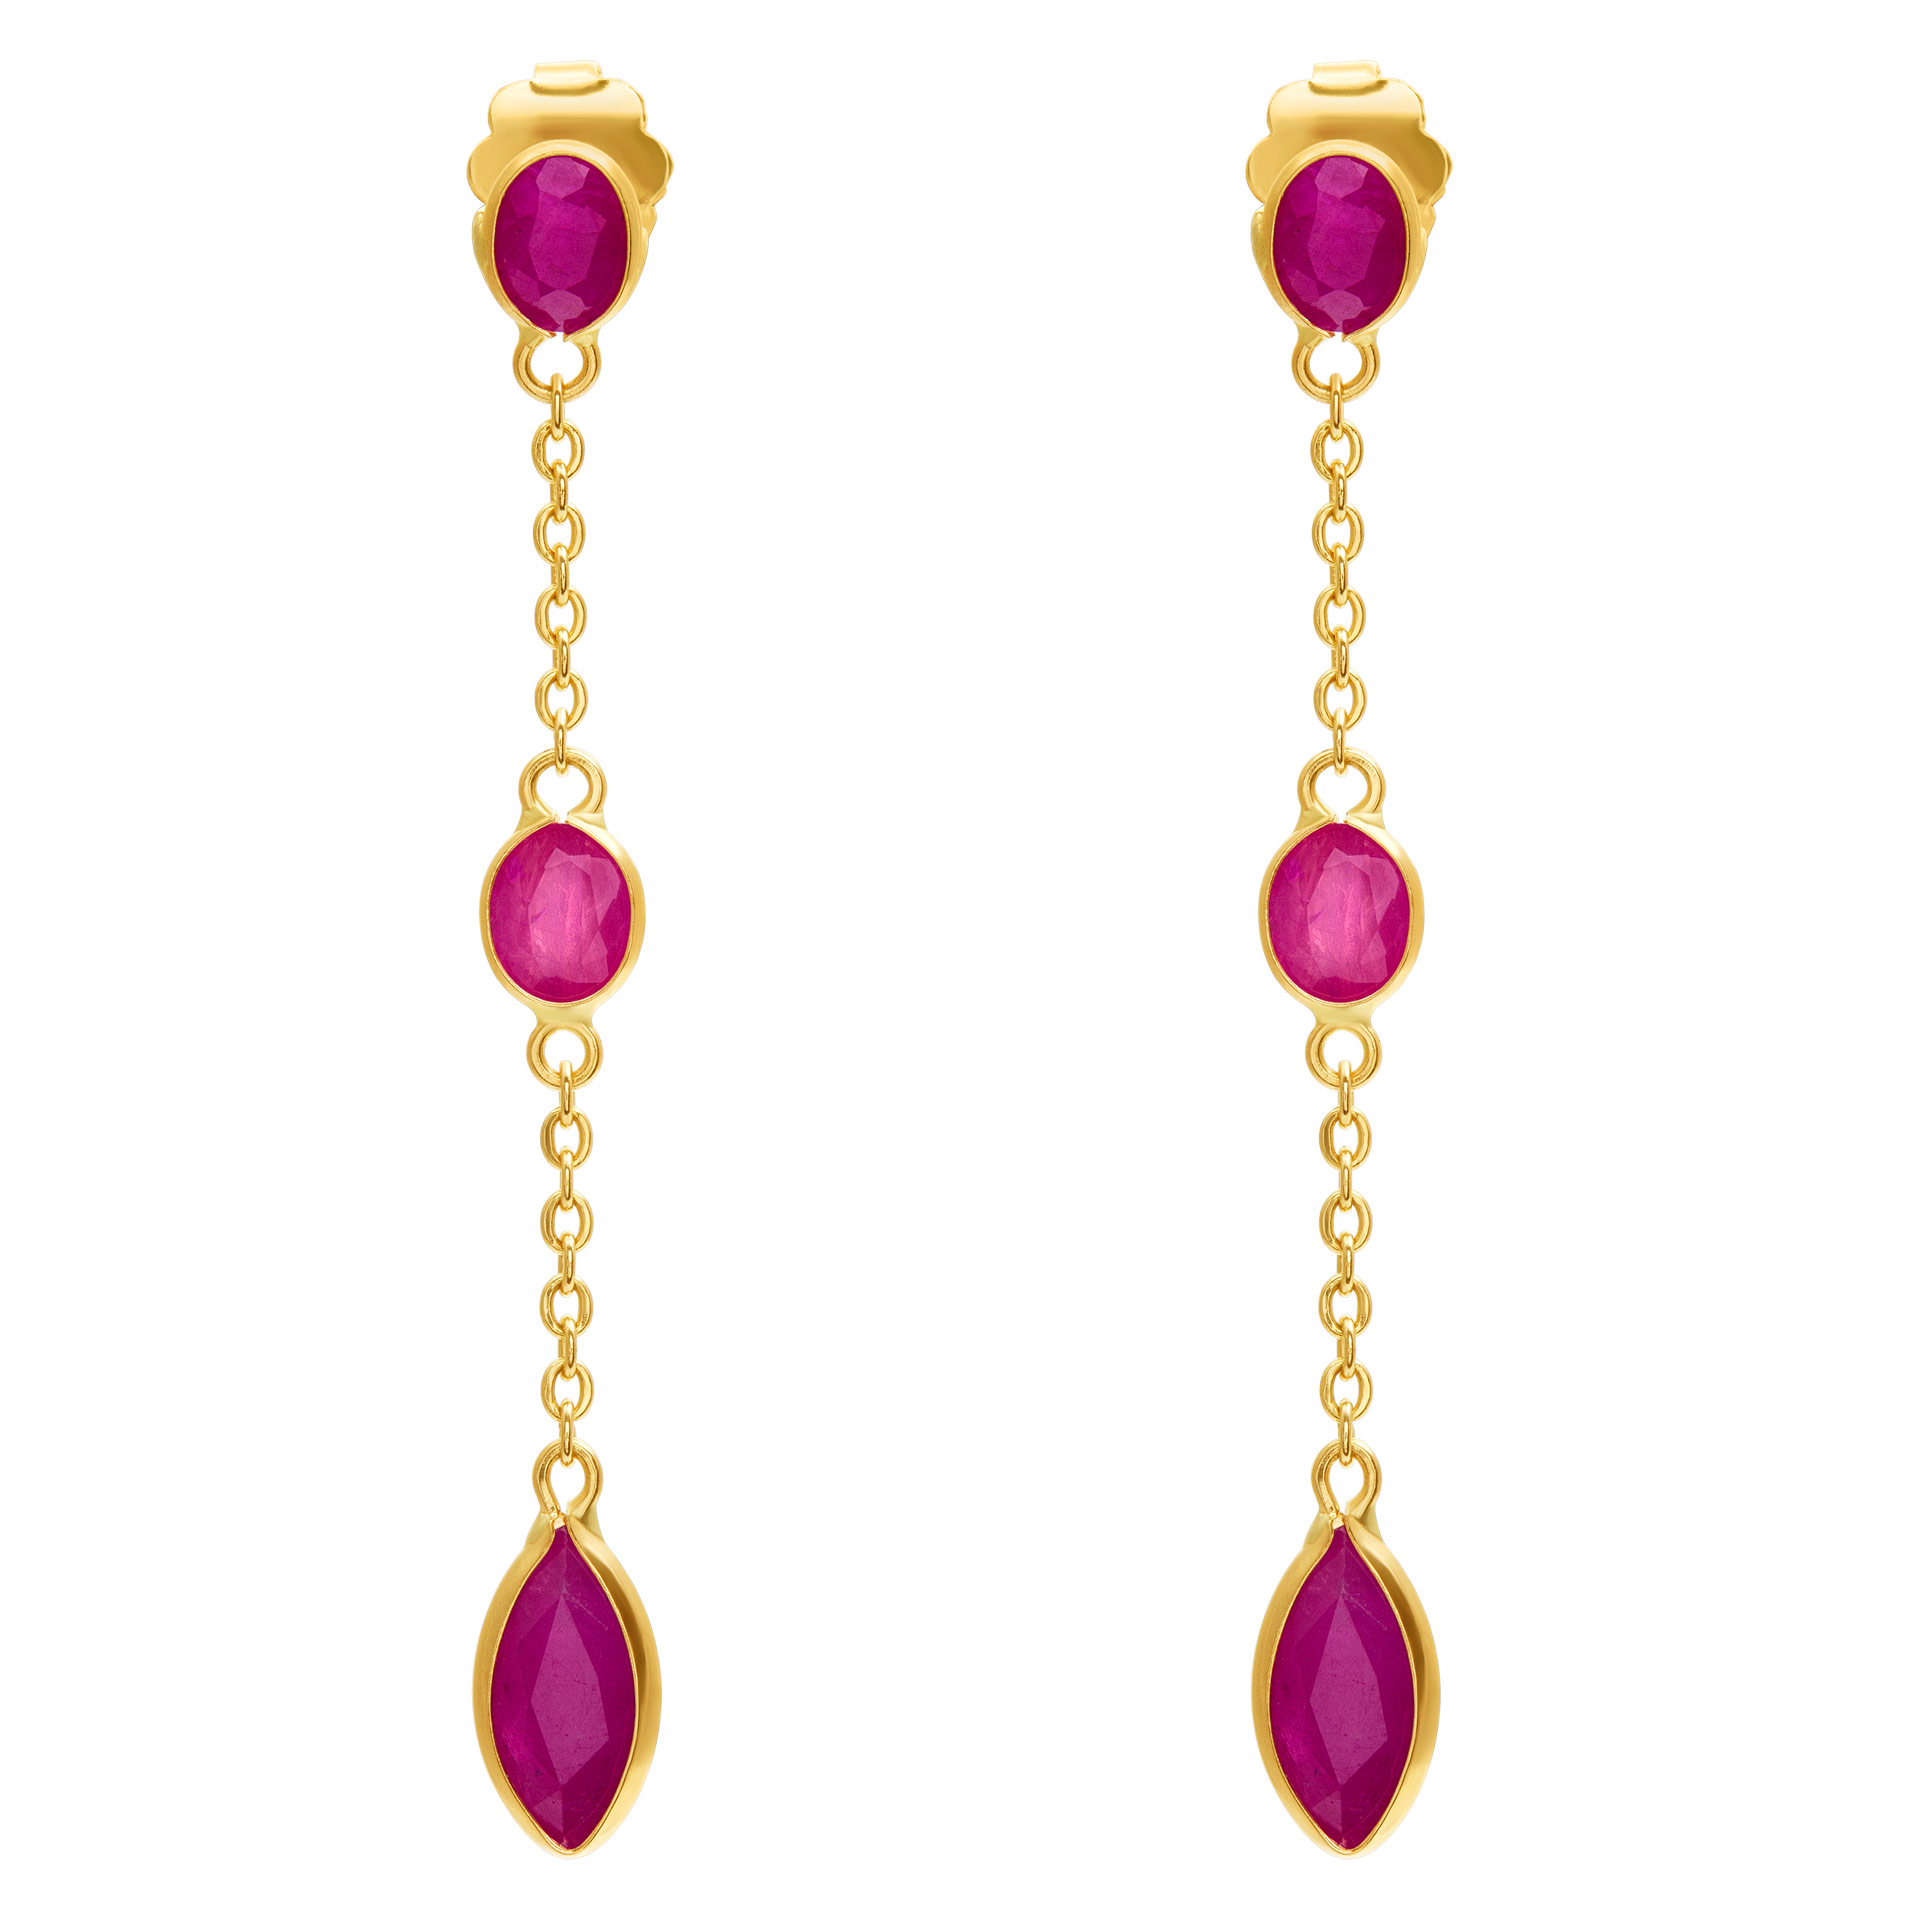 Ruby drop earrings in 14k yellow gold with approx 3.23 carats in rubies